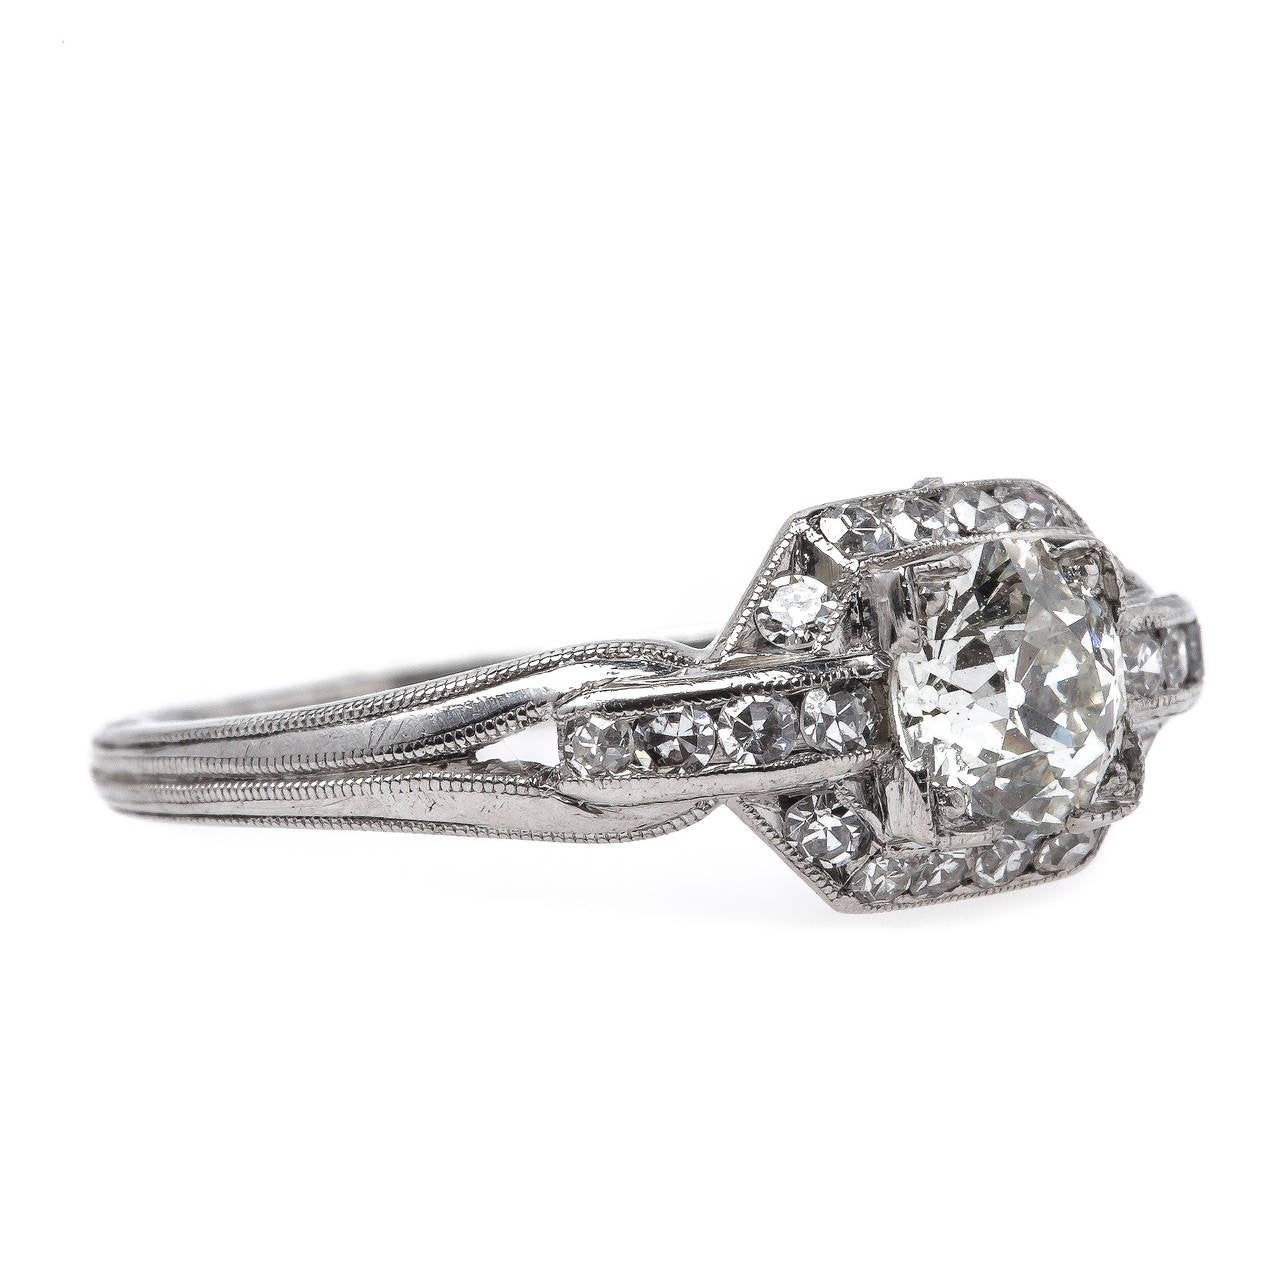 Freeport is a gorgeous and authentic Art Deco era (circa 1920) platinum ring centering a box-set 0.62ct EGL certified Old European Cut diamond graded J color and VS2 clarity. The timeless ring is further framed by a delicate halo of twenty Single